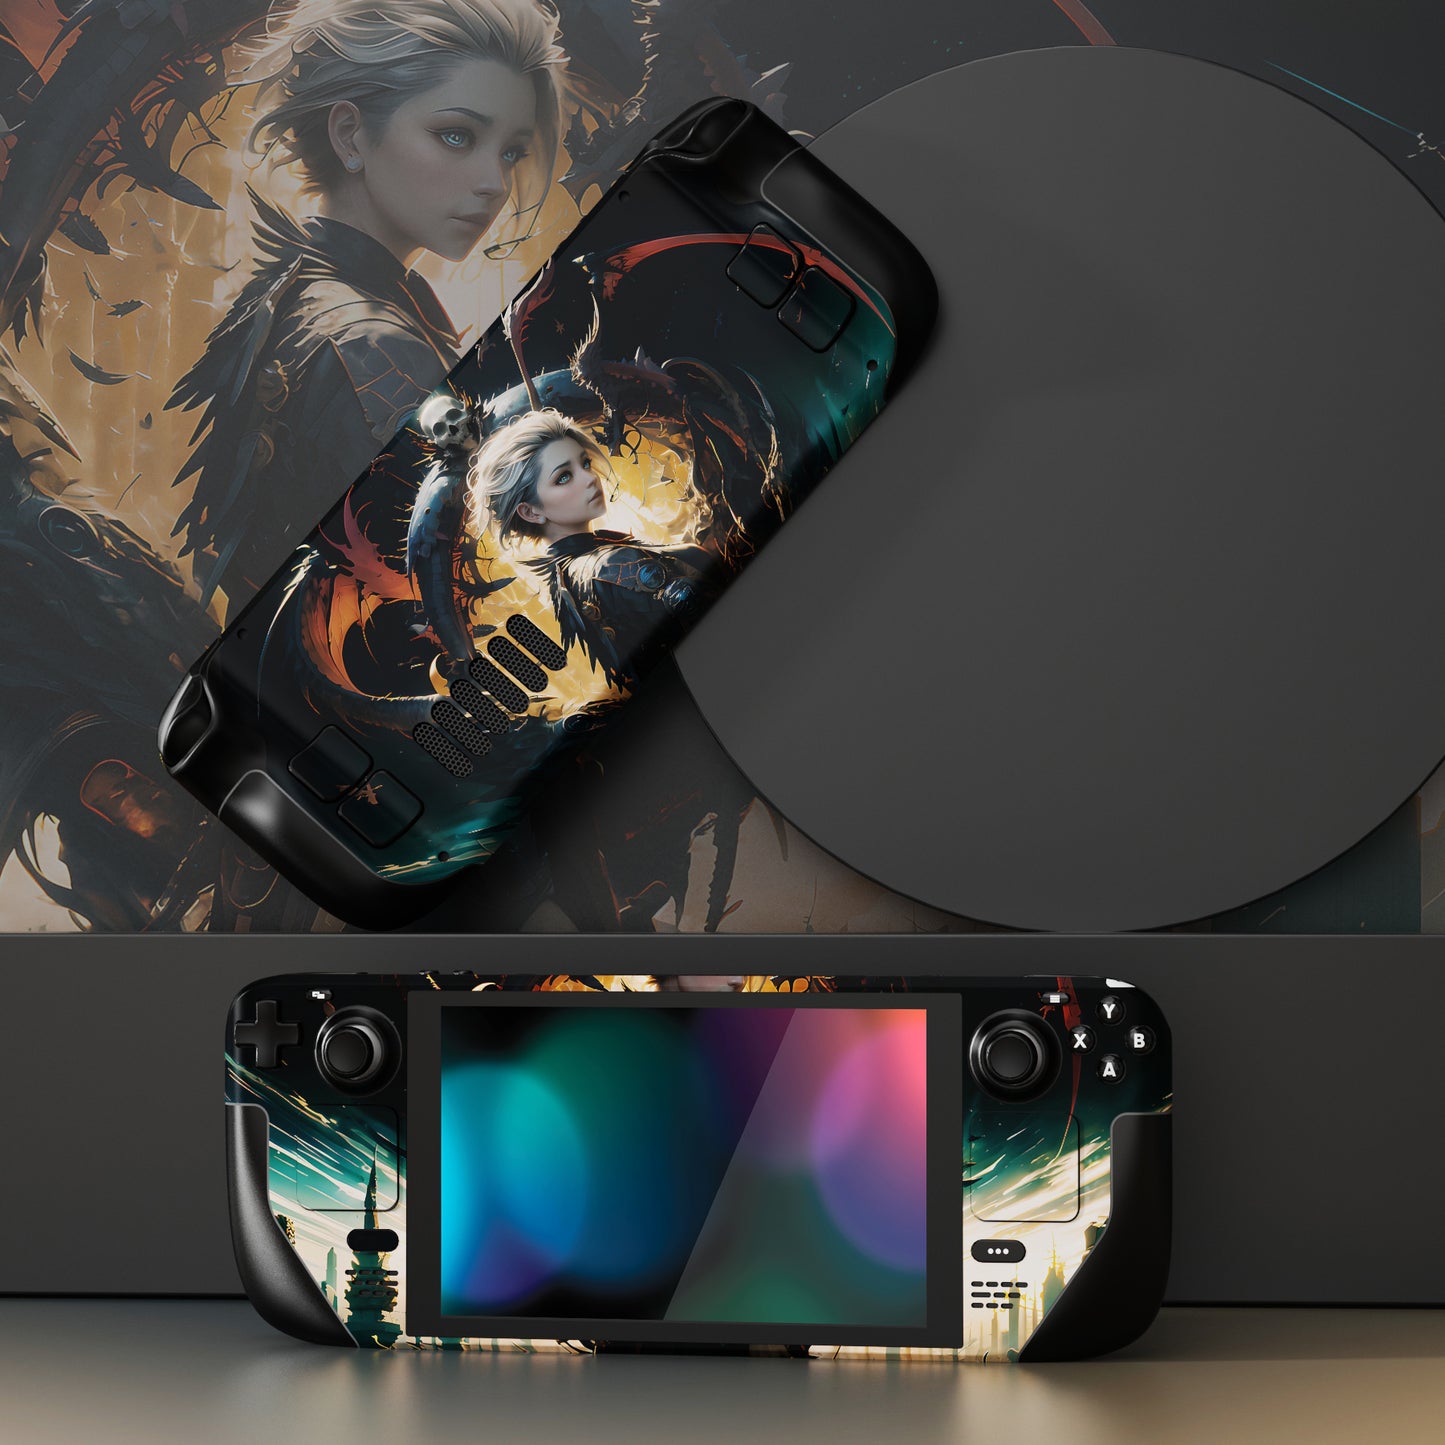 PlayVital Full Set Protective Skin Decal for Steam Deck, Custom Stickers Vinyl Cover for Steam Deck Handheld Gaming PC - Dragon Vision - SDTM072 PlayVital